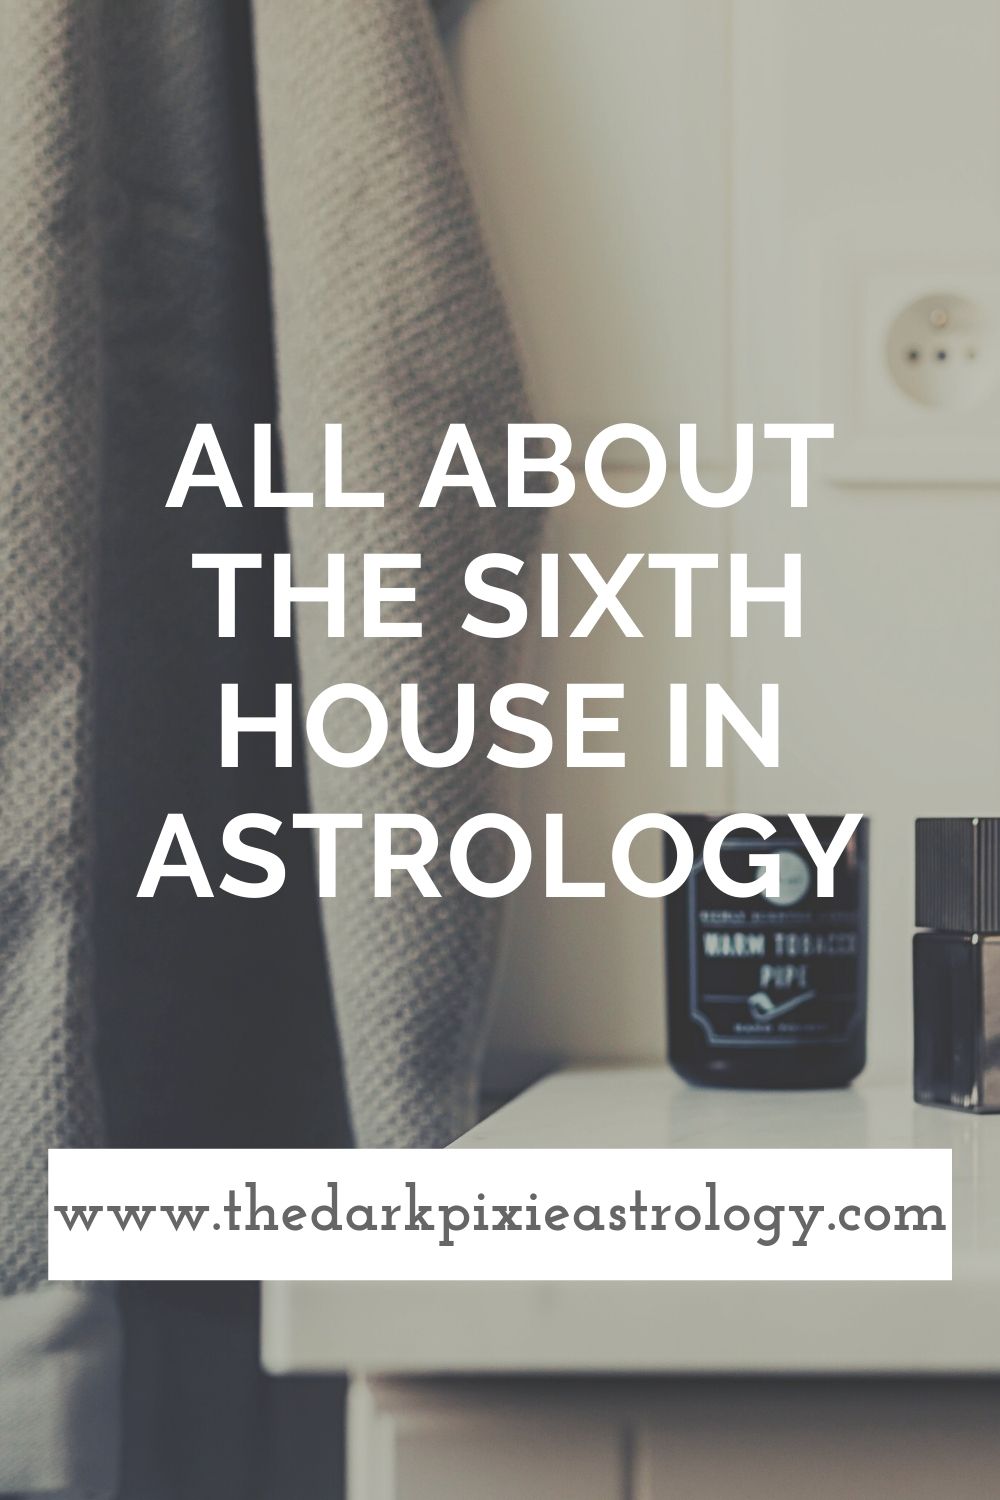 All About the Sixth House in Astrology - The Dark Pixie Astrology